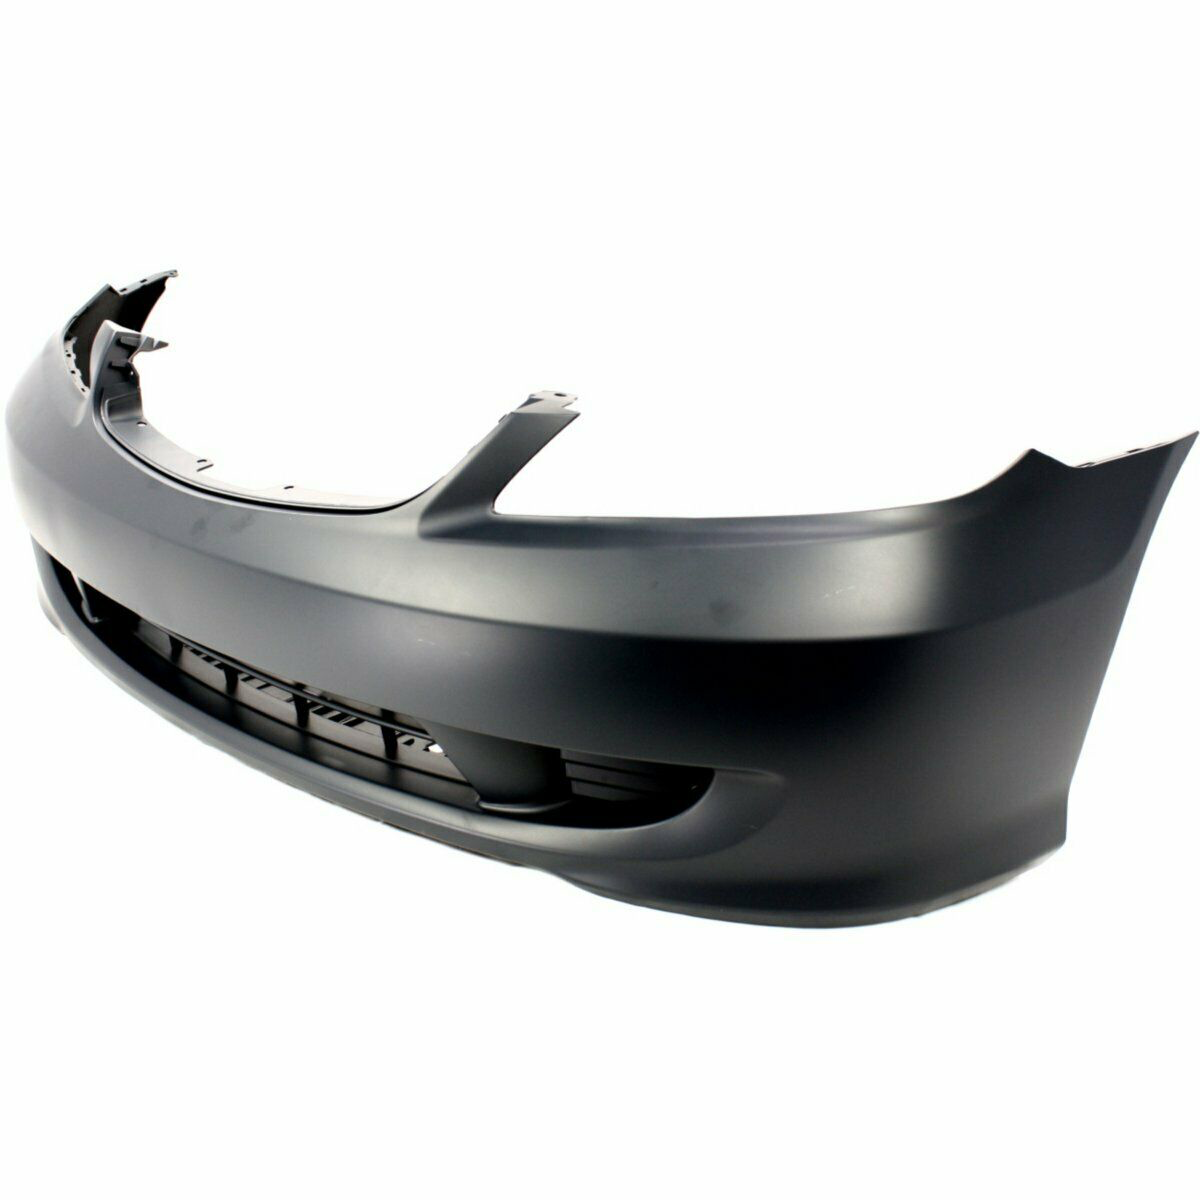 2004-2005 Honda Civic Hybrid Front Bumper Painted to Match